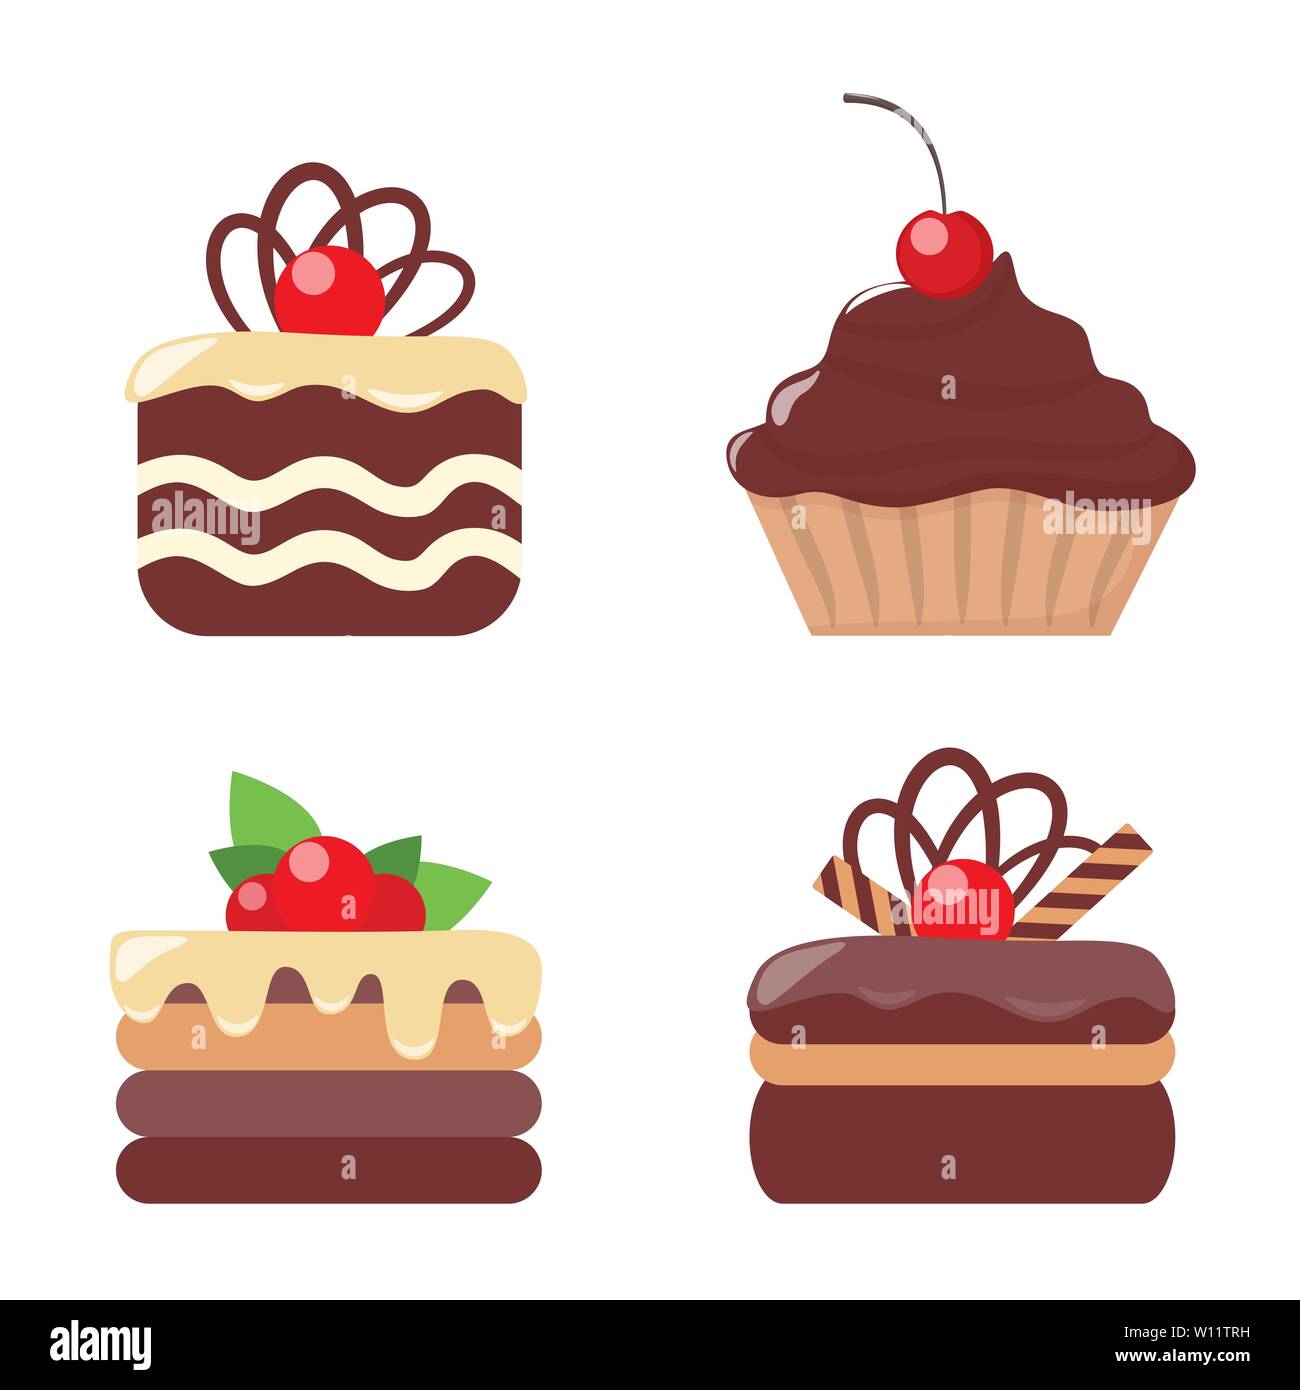 Cakes, set. Cookies and biscuits icons. Various pastry snack food. Chocolate and vanilla cookies with creame and berries. Stock Vector